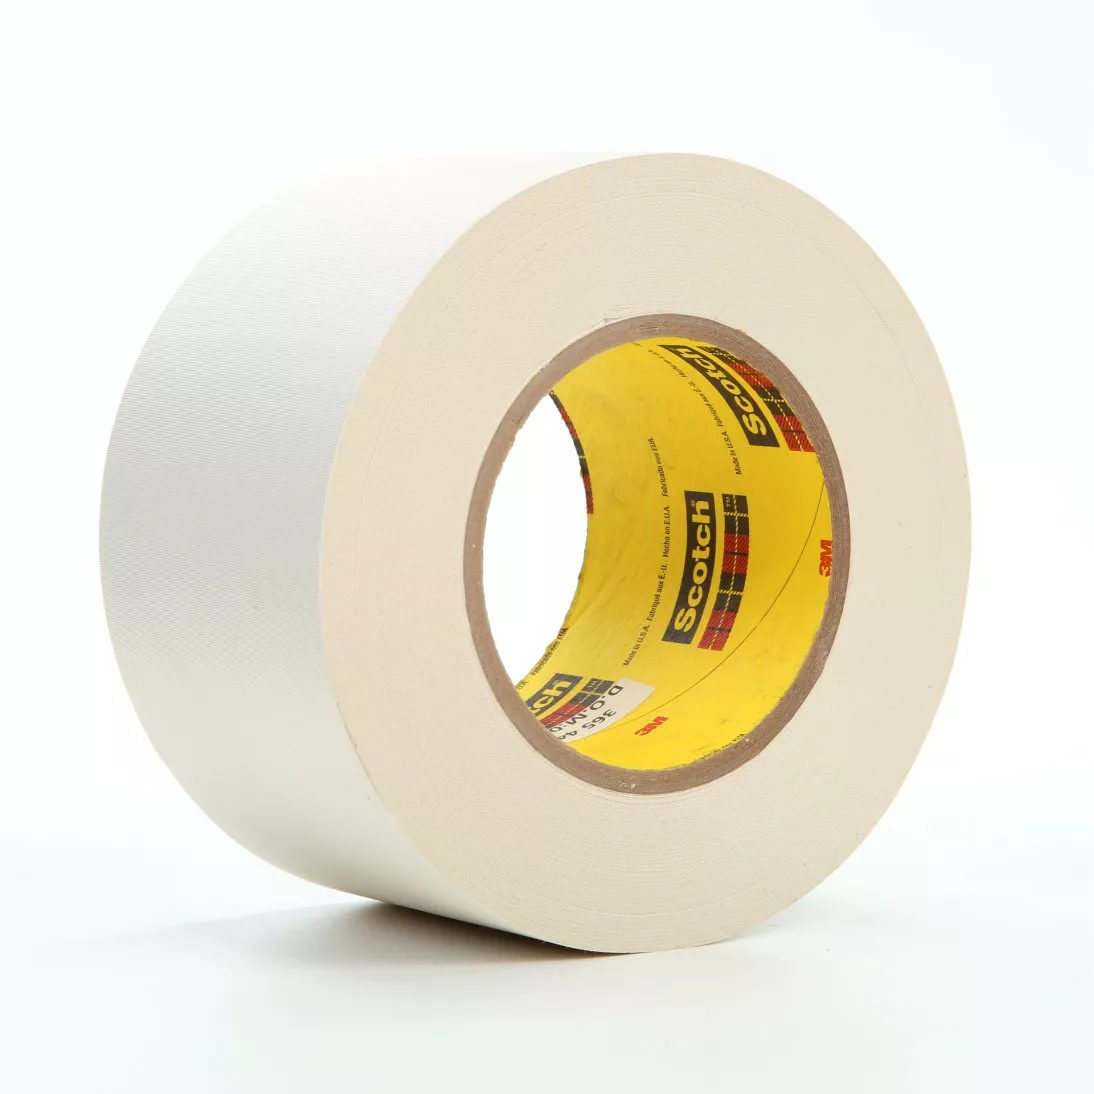 3M™ Thermosetable Glass Cloth Tape 365, White, 3 in x 60 yd, 8.3 mil, 12
rolls per case